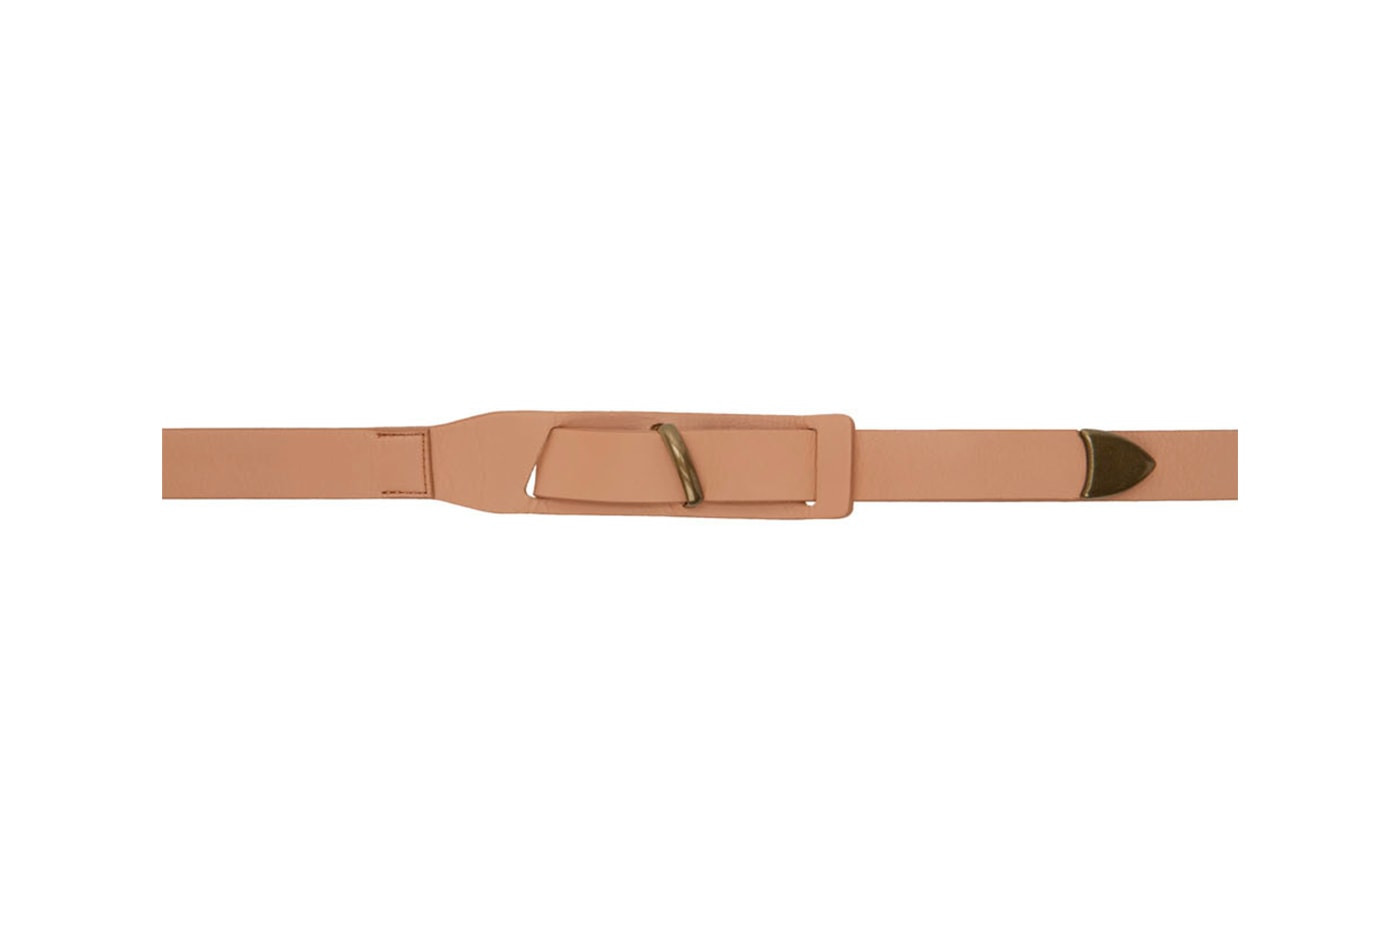 Robert Geller Beige & Tan Long Belts Release Info SSENSE exclusive accessories made in japan nappa leather gold-tone hardware 191215M131002 191215M131001 drop date pricing buy now 